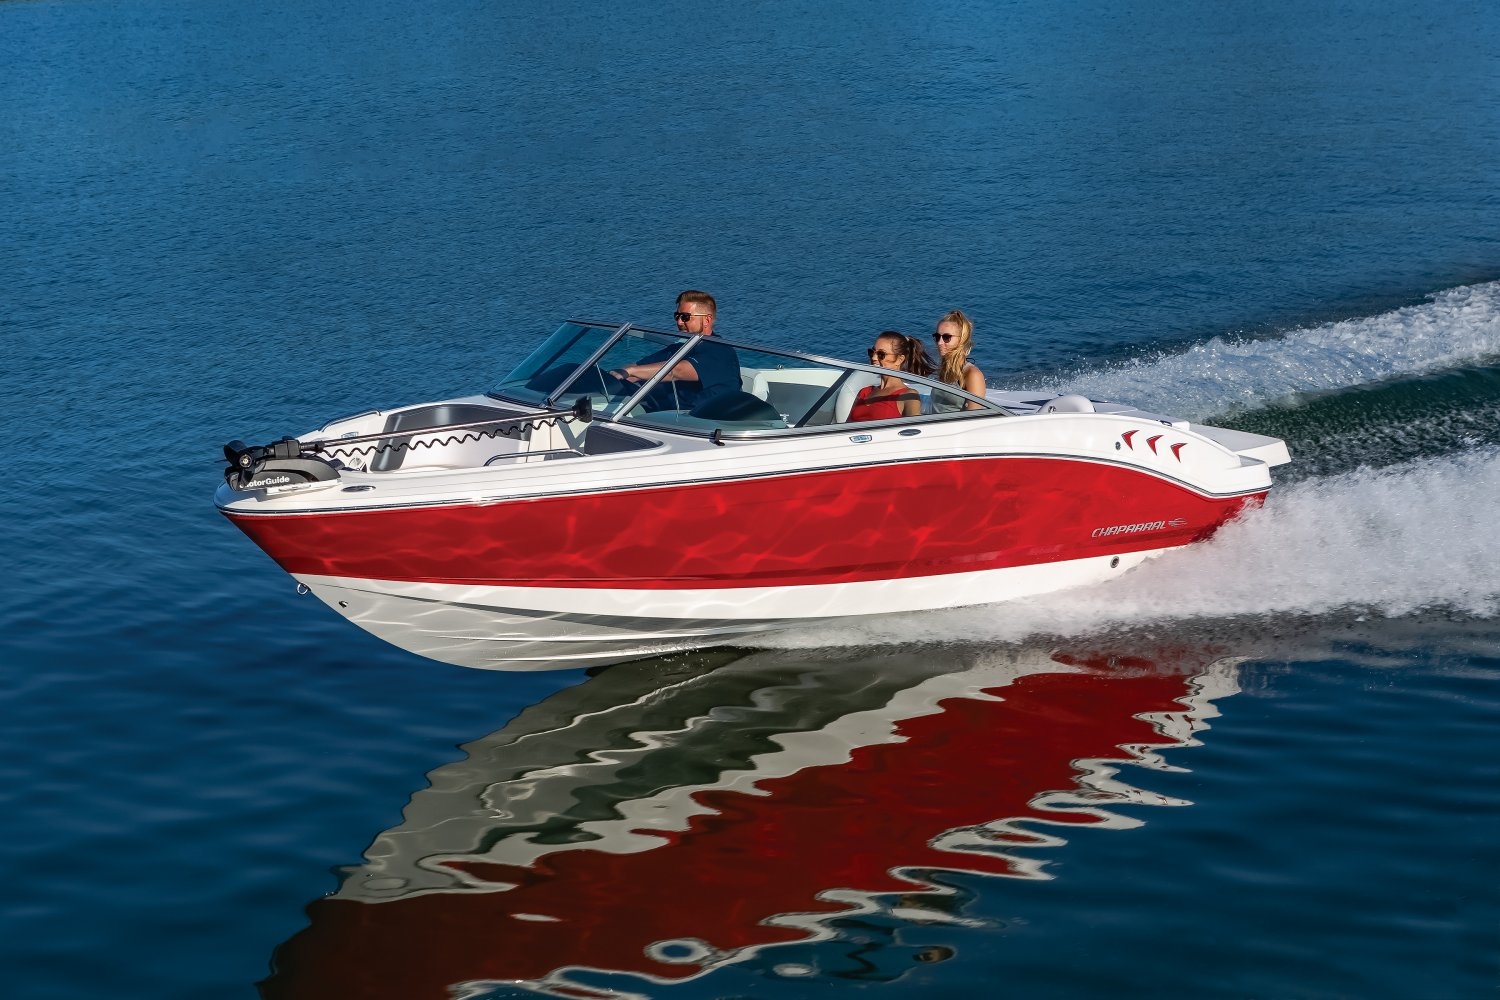 Chaparral 21 SSi Ski & Fish: Prices, Specs, Reviews and Sales Information -  itBoat